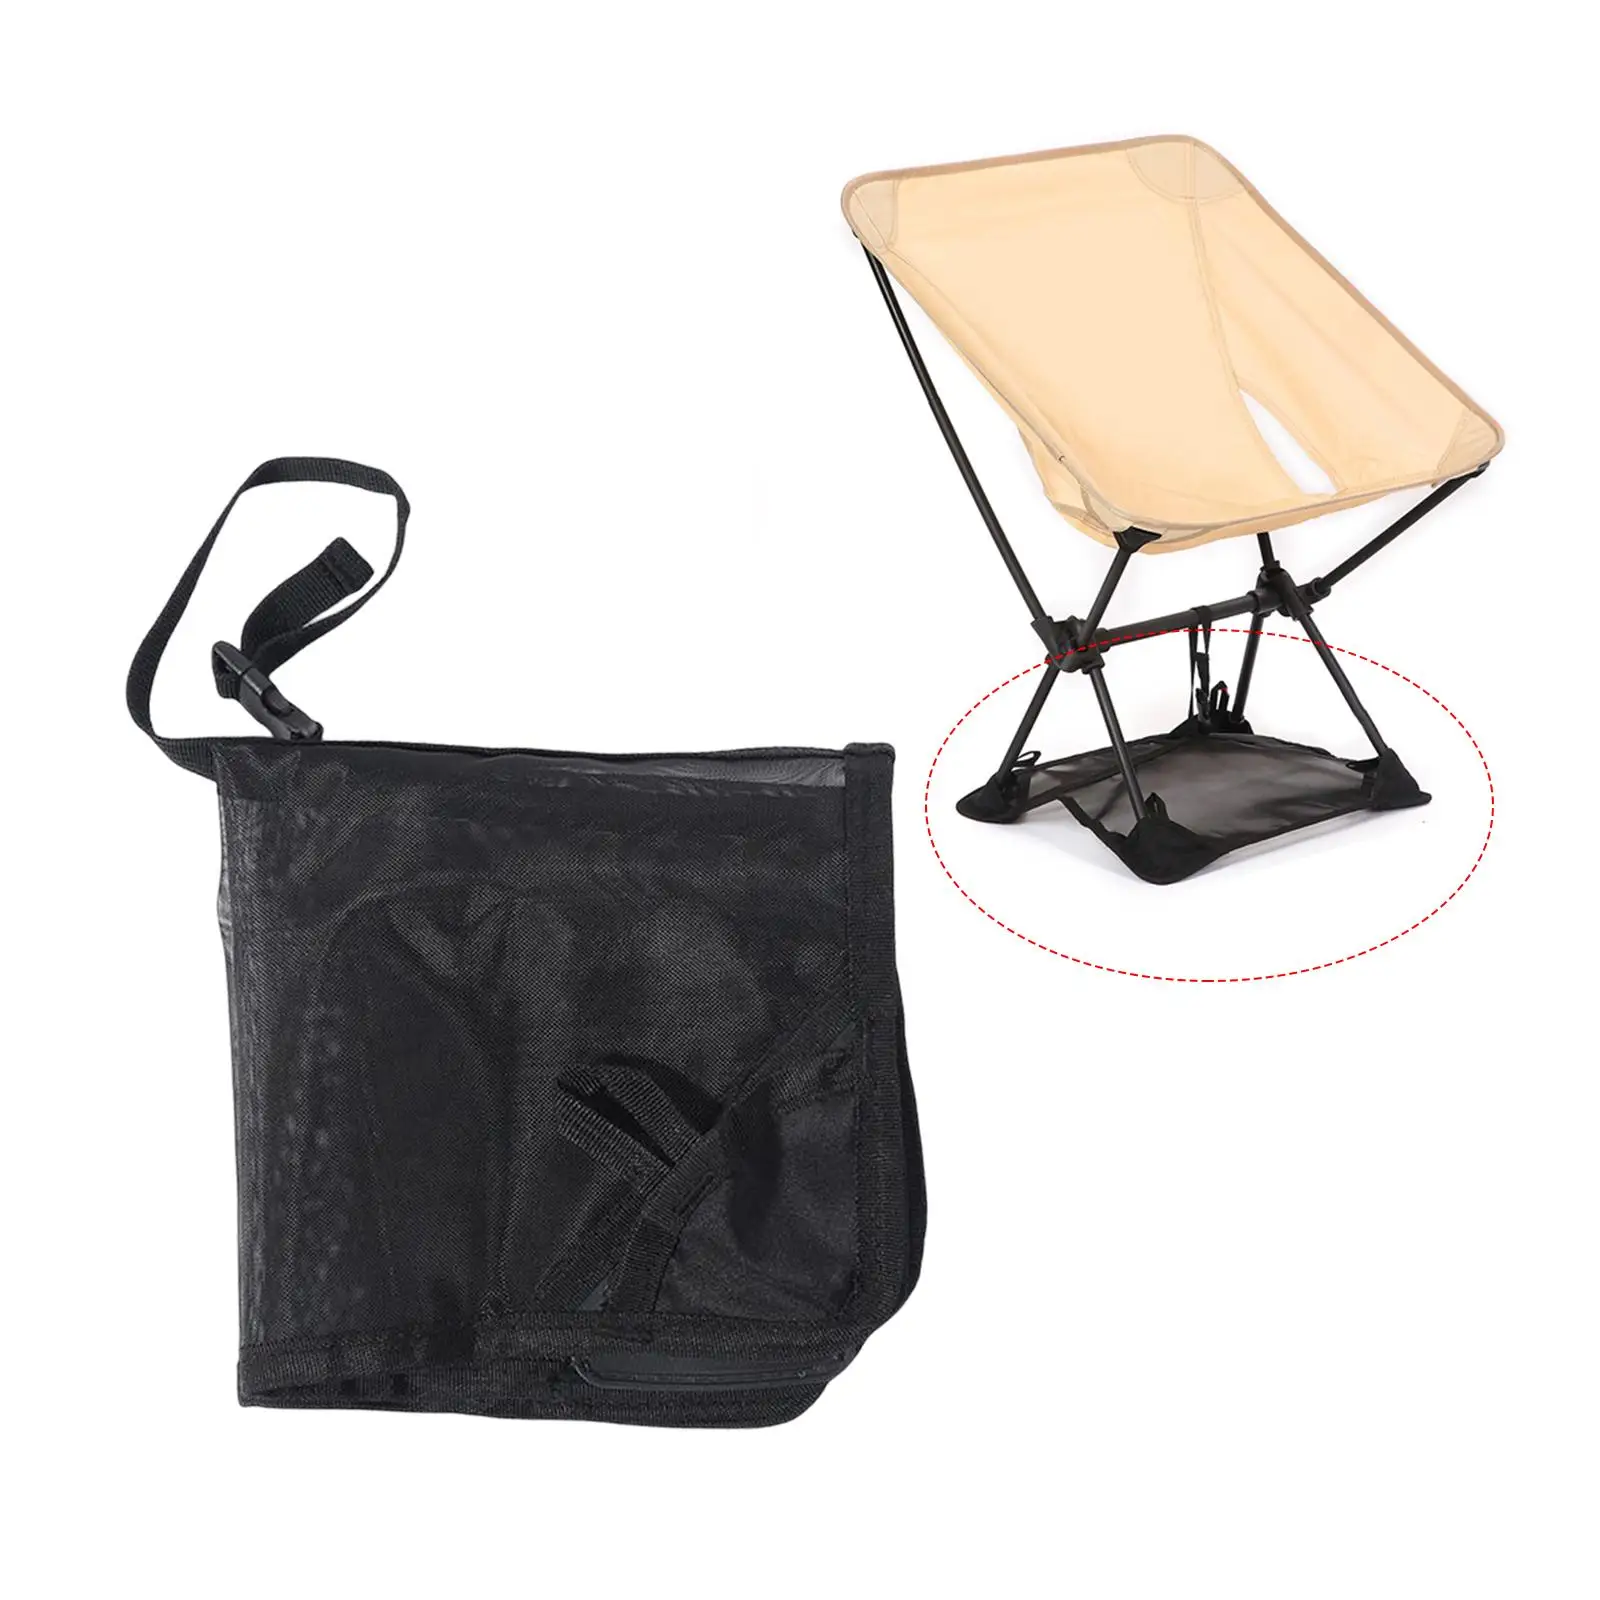 Portable Anti-Collapse Mat Without Chair Collapsible Lightweight Picnics Prevent from Sinking Fishing for Folding Camping Chair